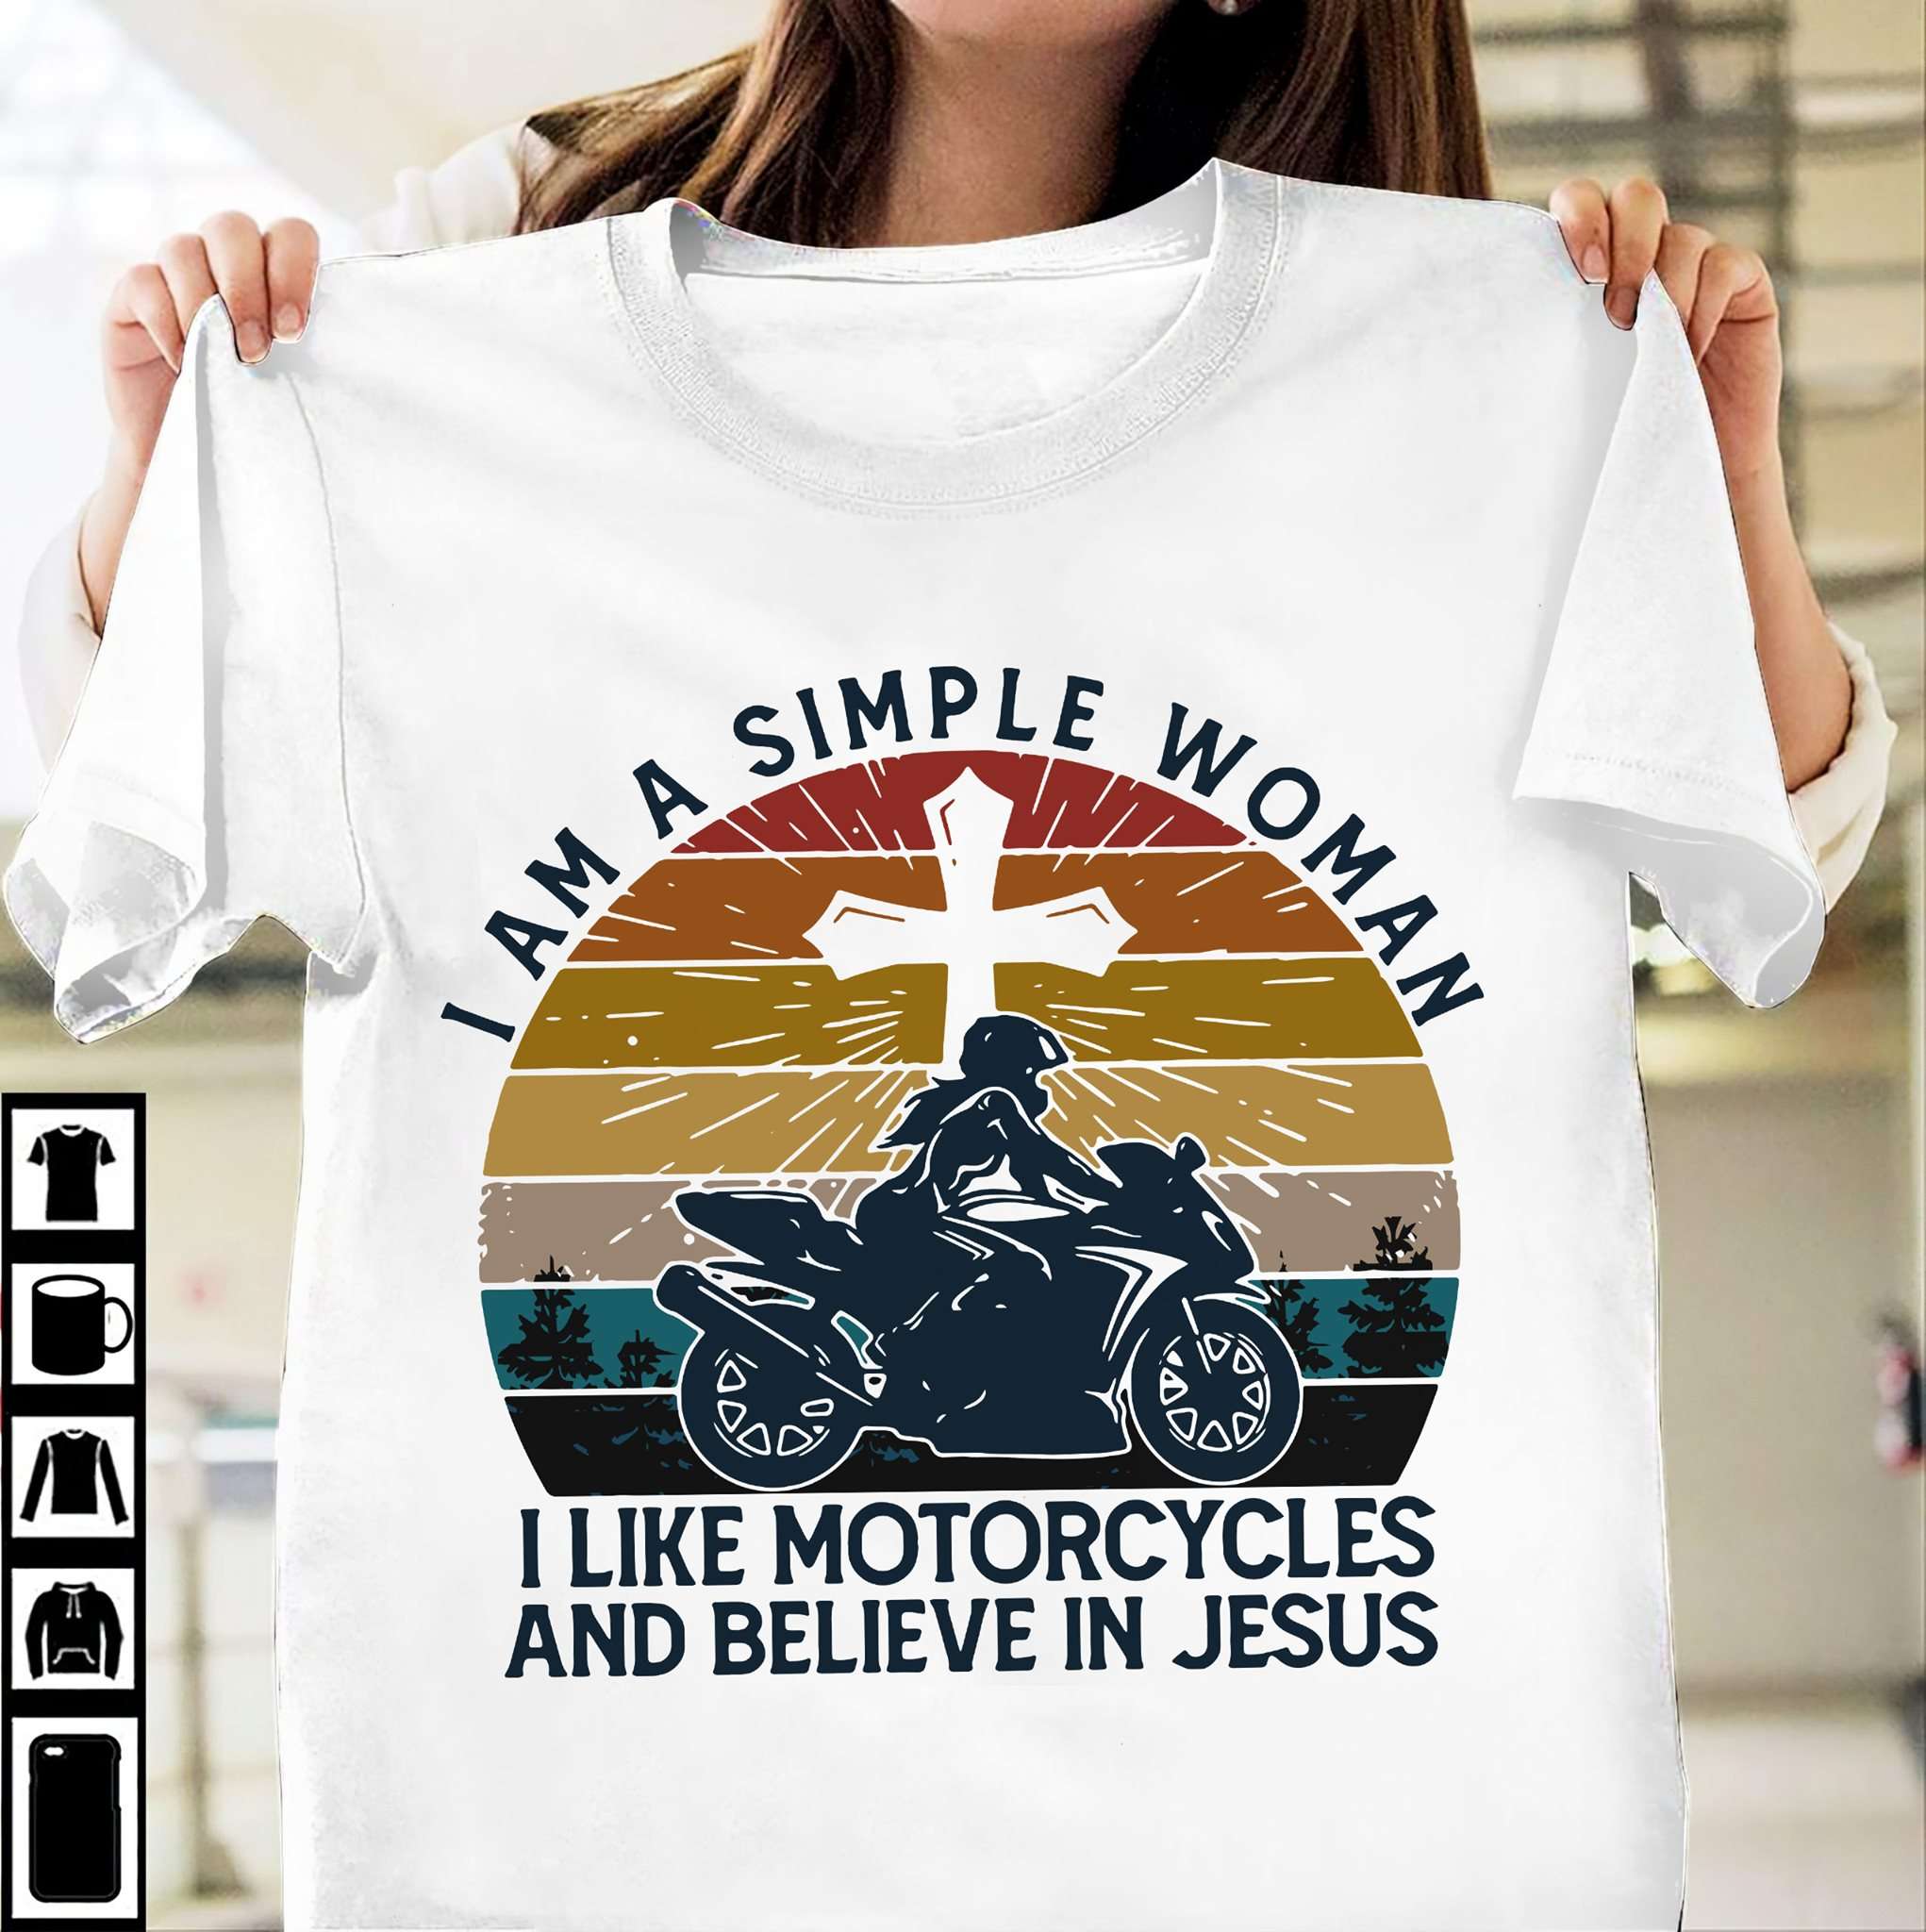 I am a simple woman I like motorcycles and believe in Jesus - Woman motorcycle racer